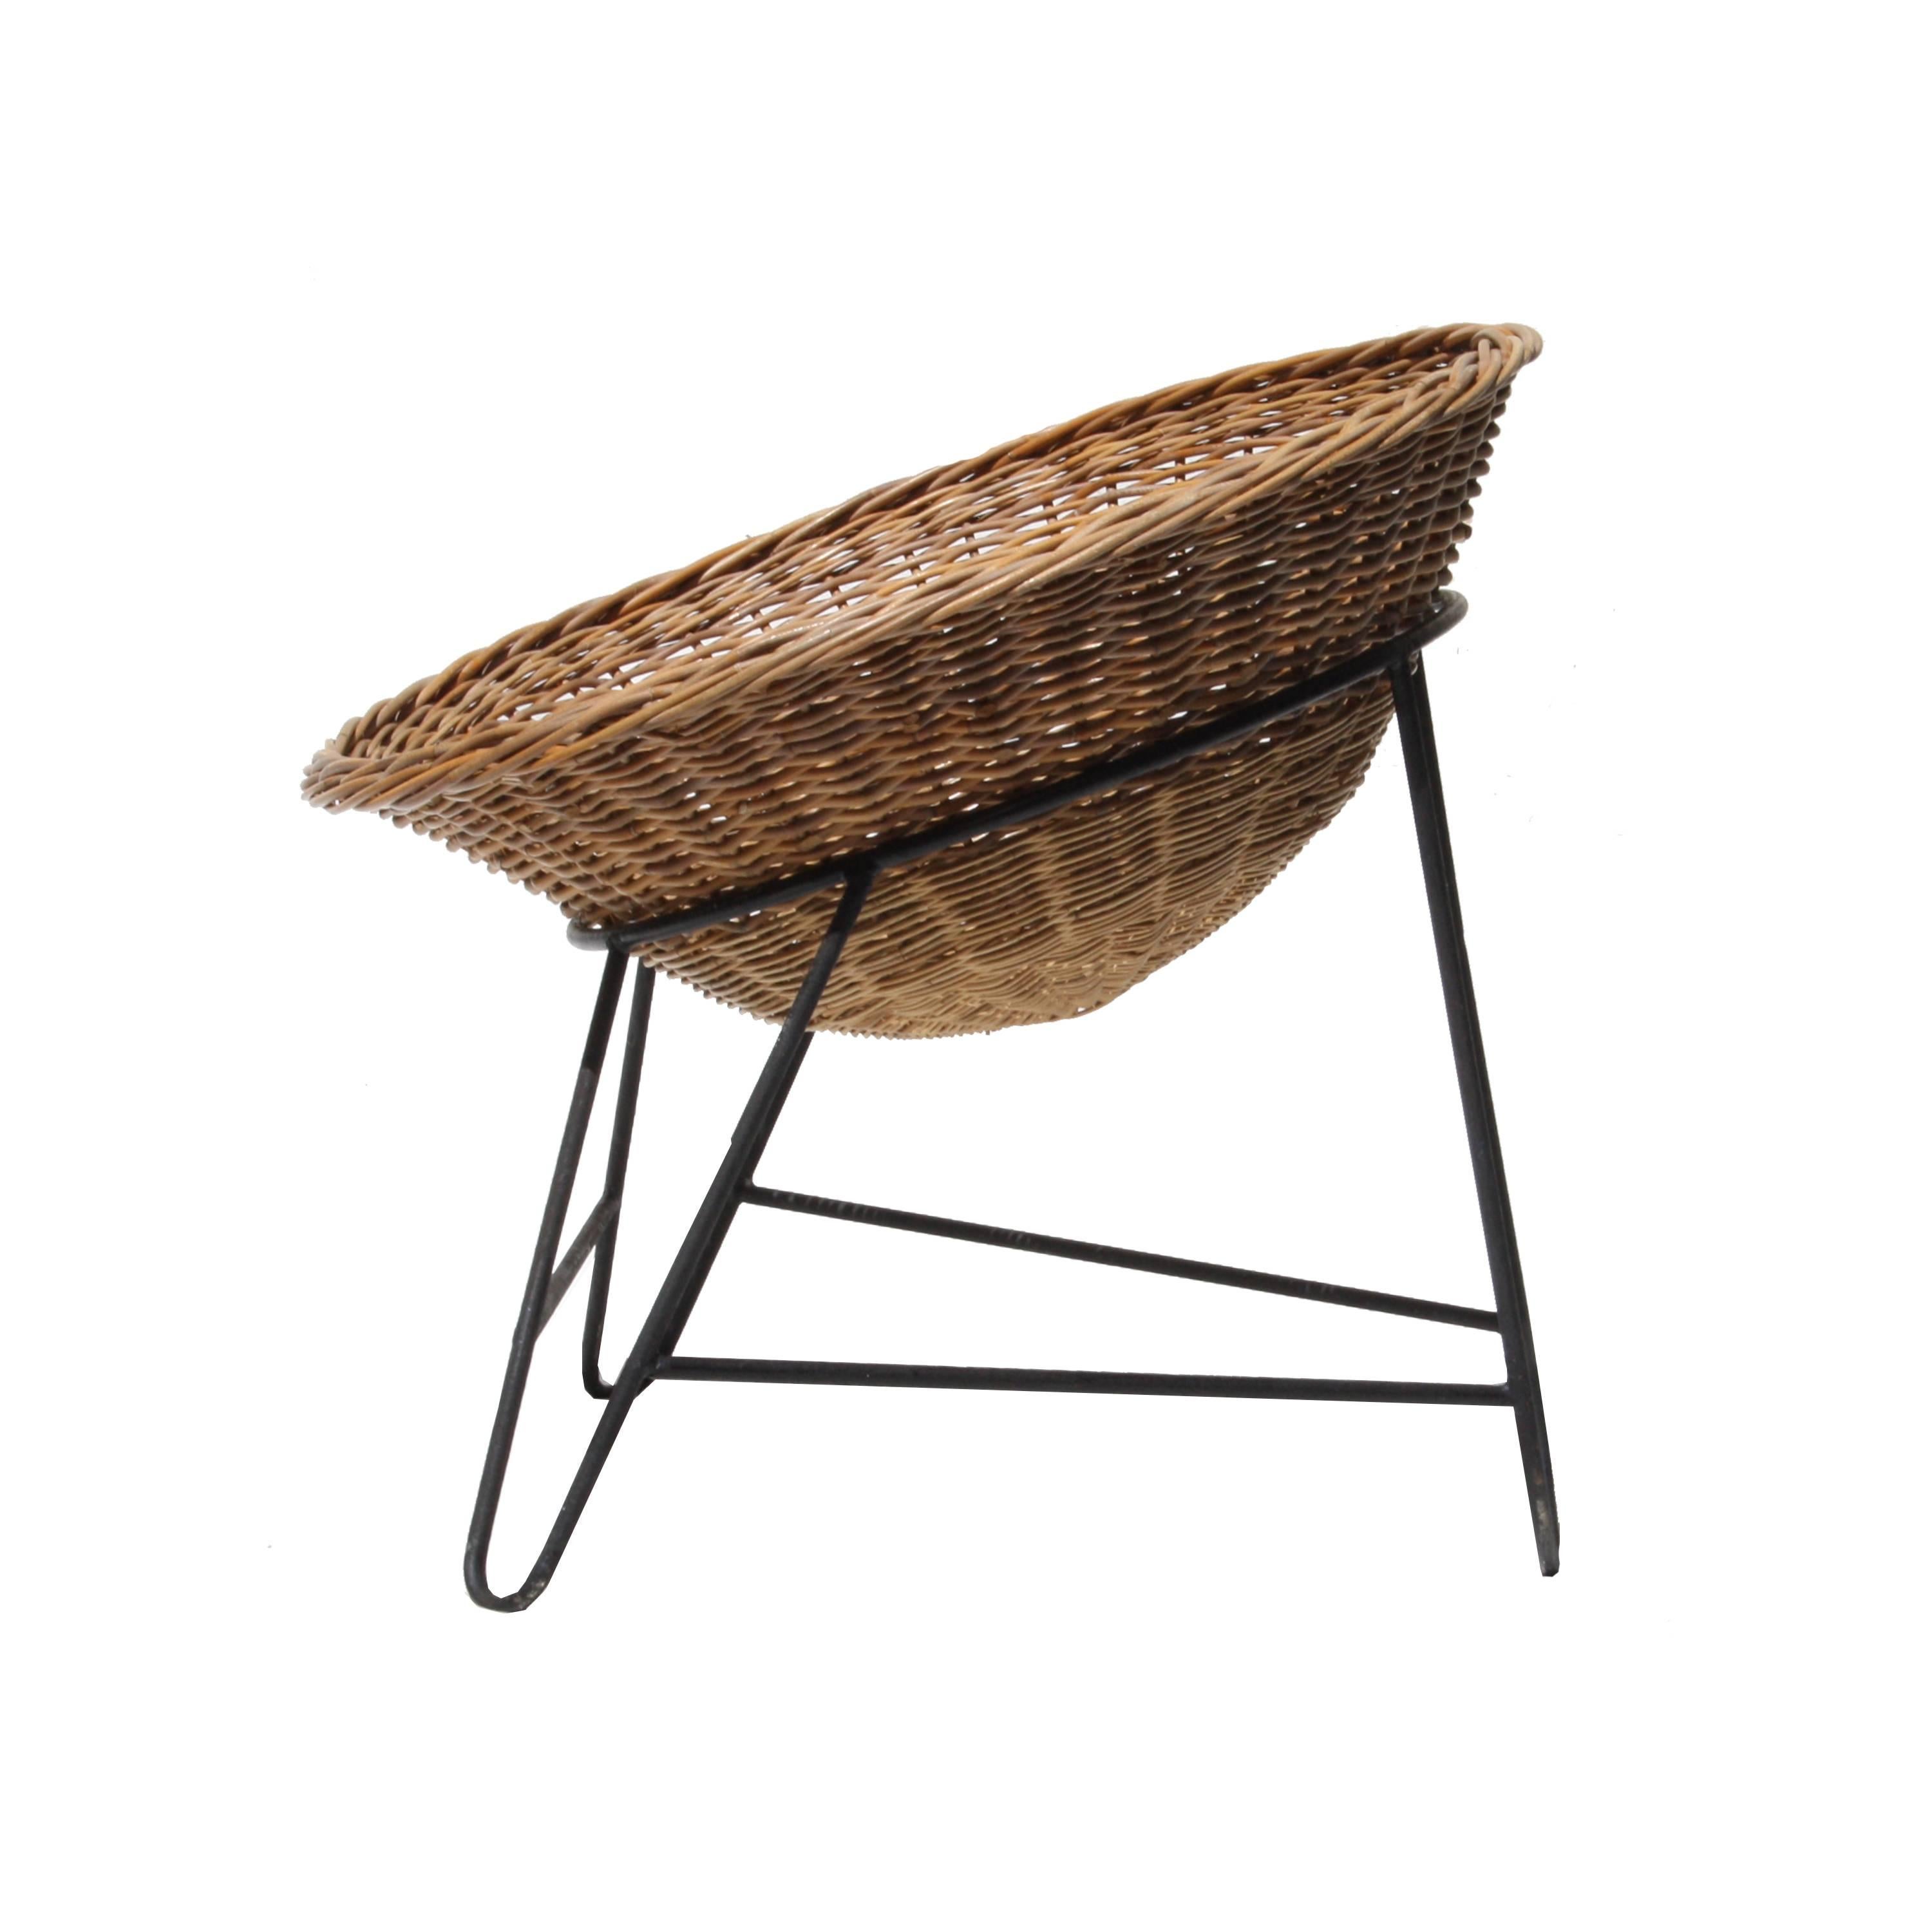 Mid-Century Modern Wicker Chair in the Style of Mathieu Matégot, France, 1950 For Sale